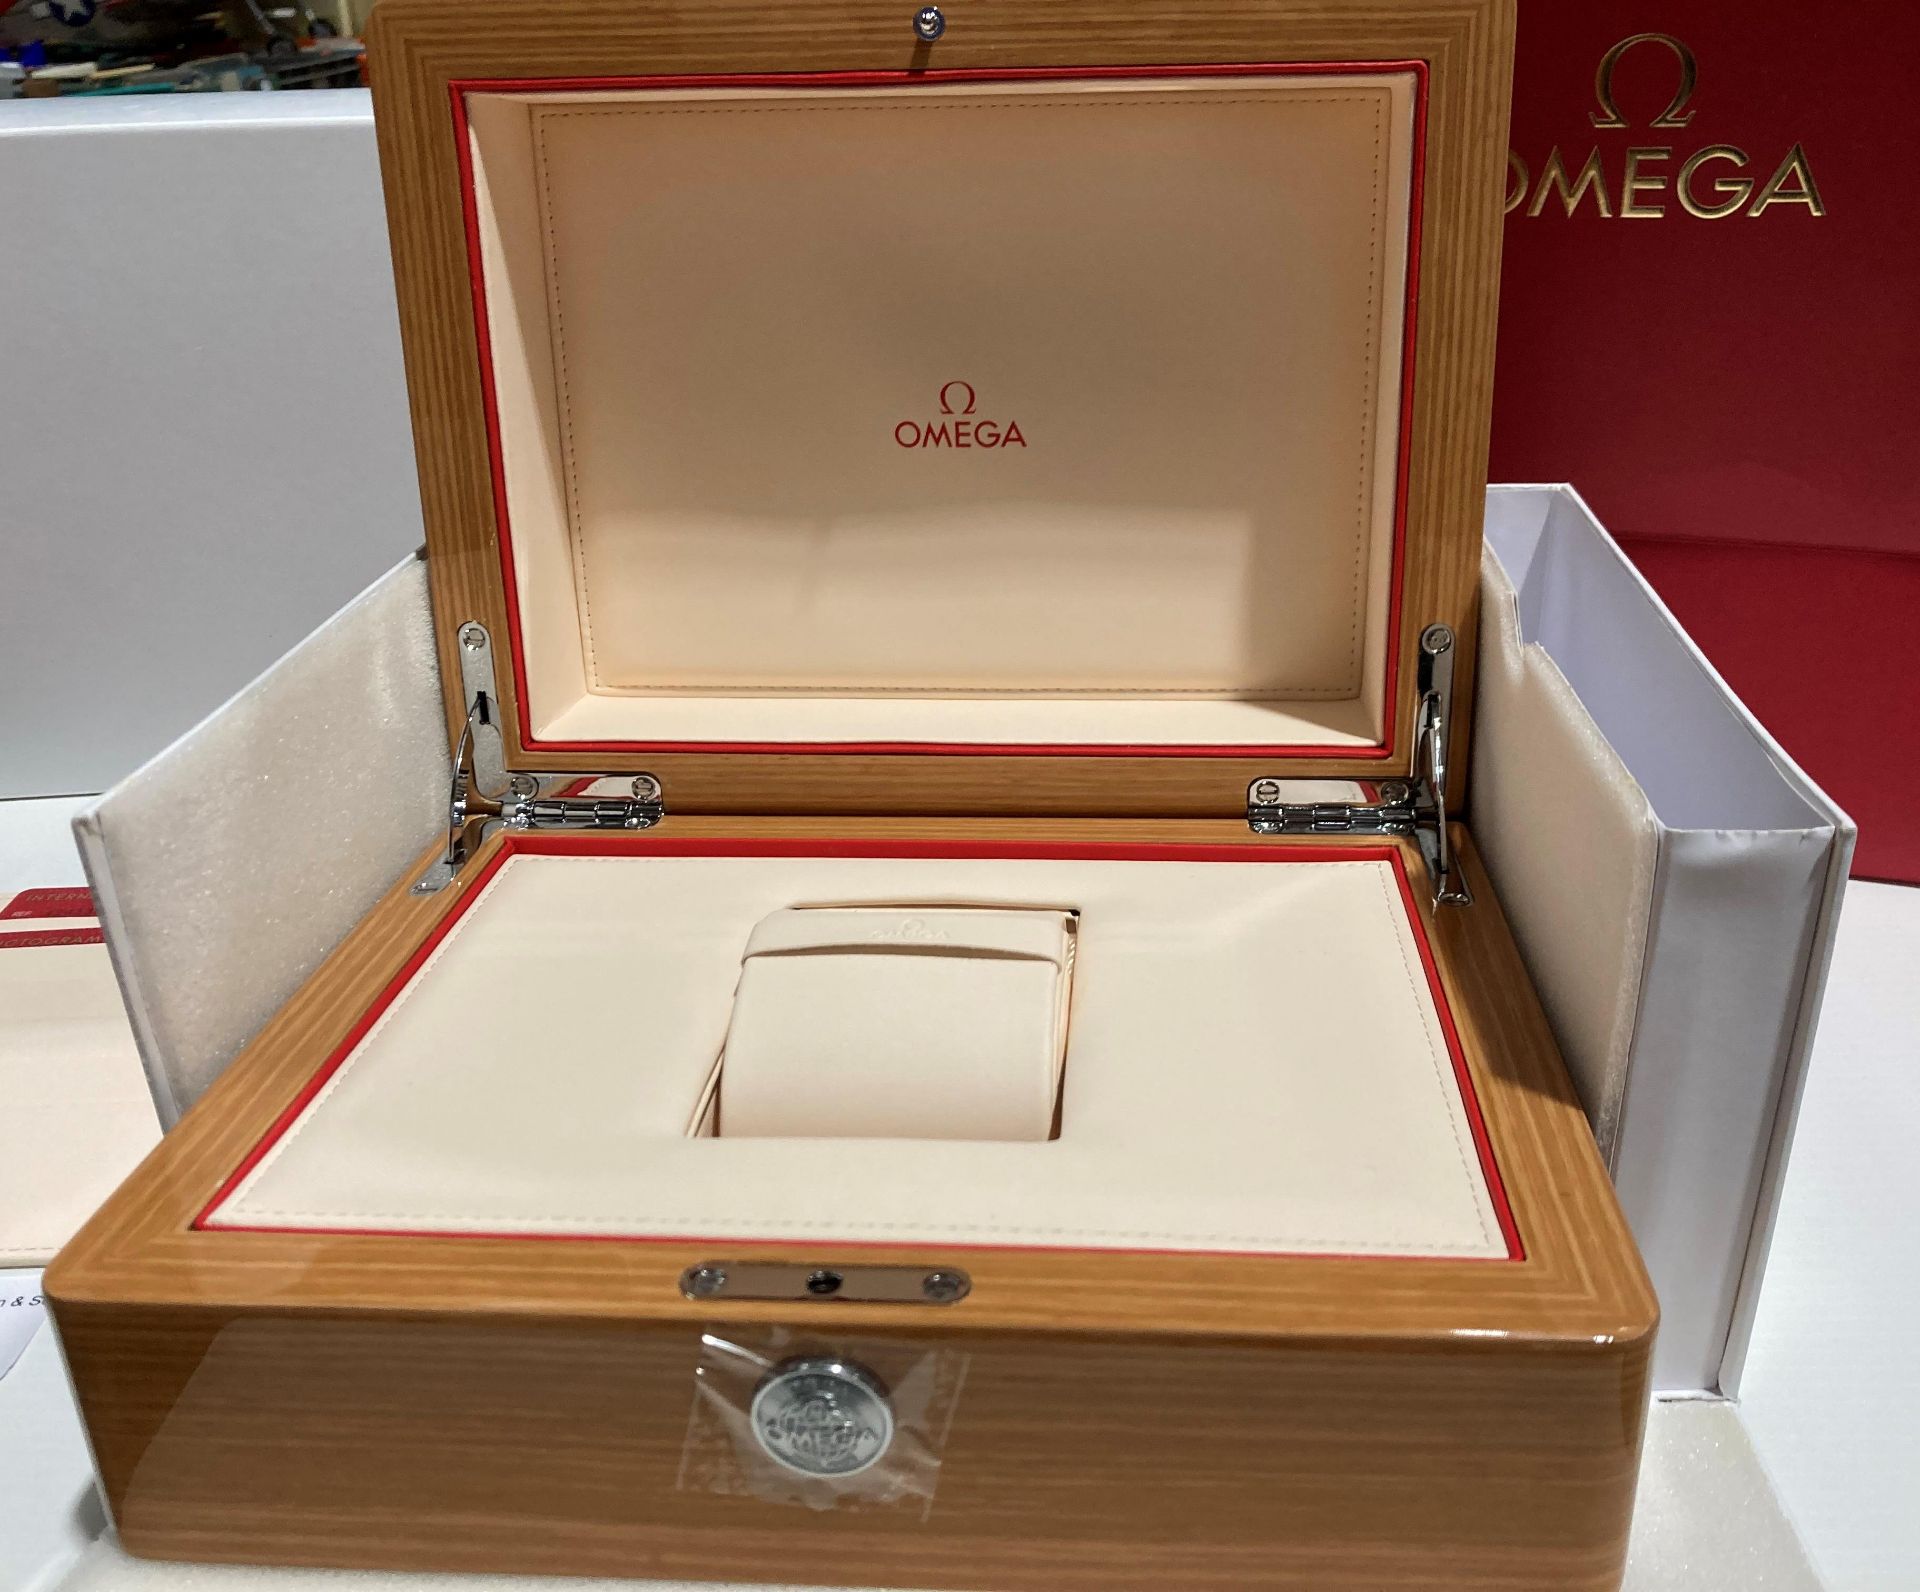 Omega polished wood-effect watch box in white outer protective case with operating instructions - Image 2 of 4